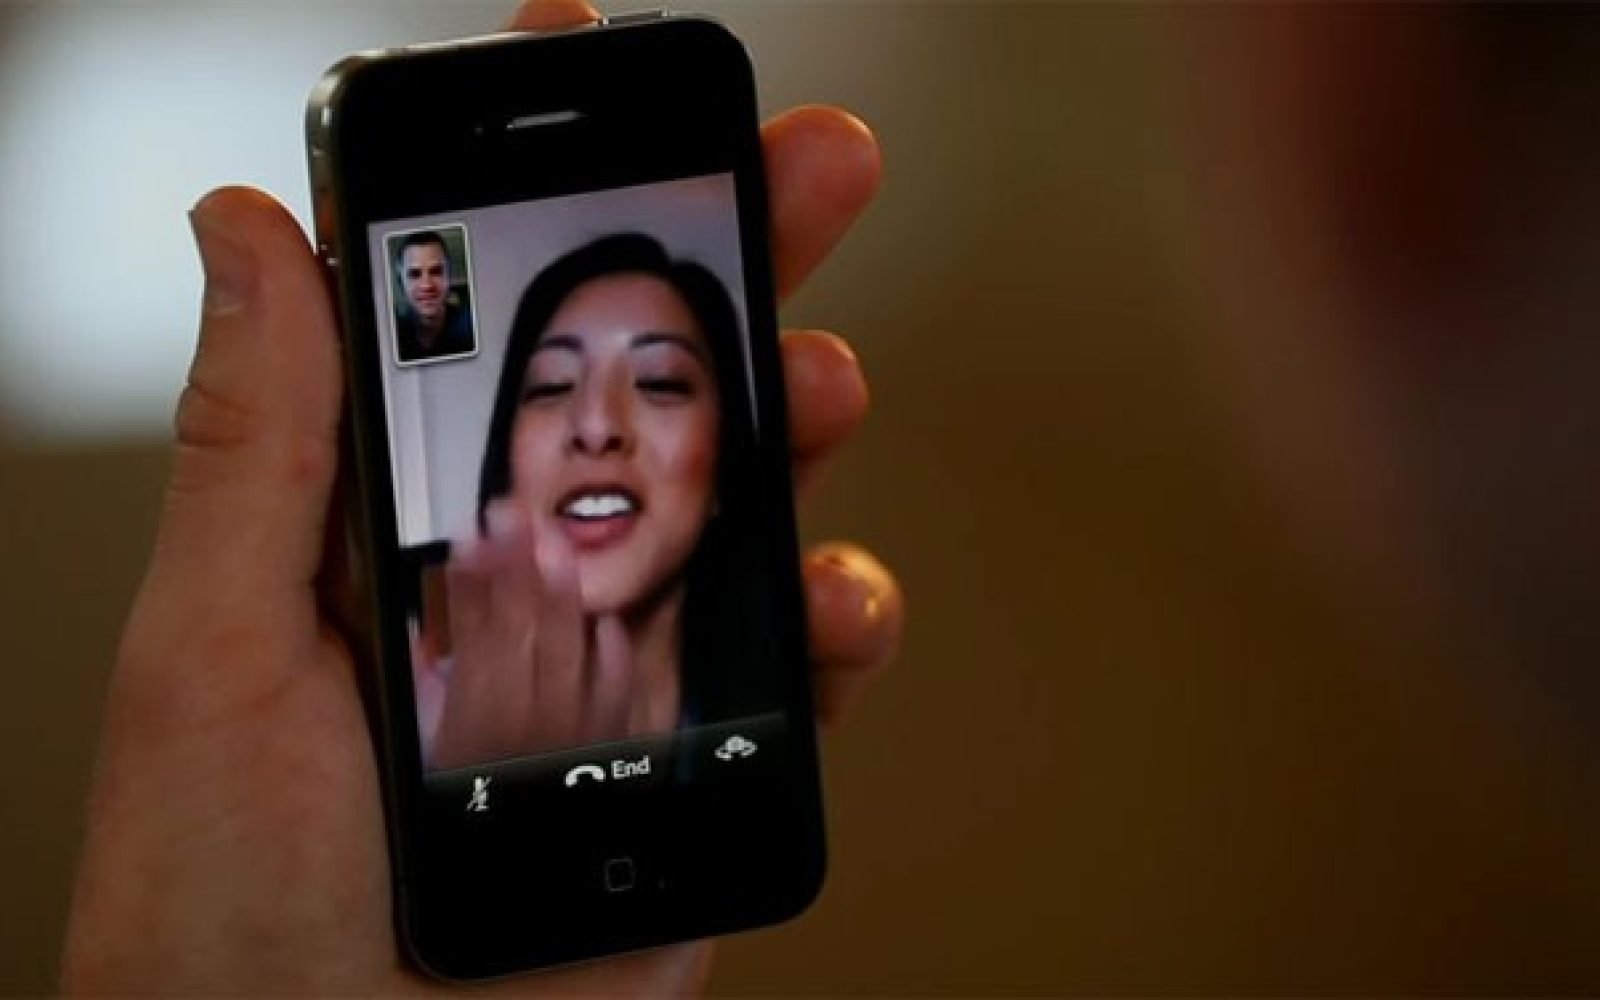 how to use facetime on mac to call friends iphone